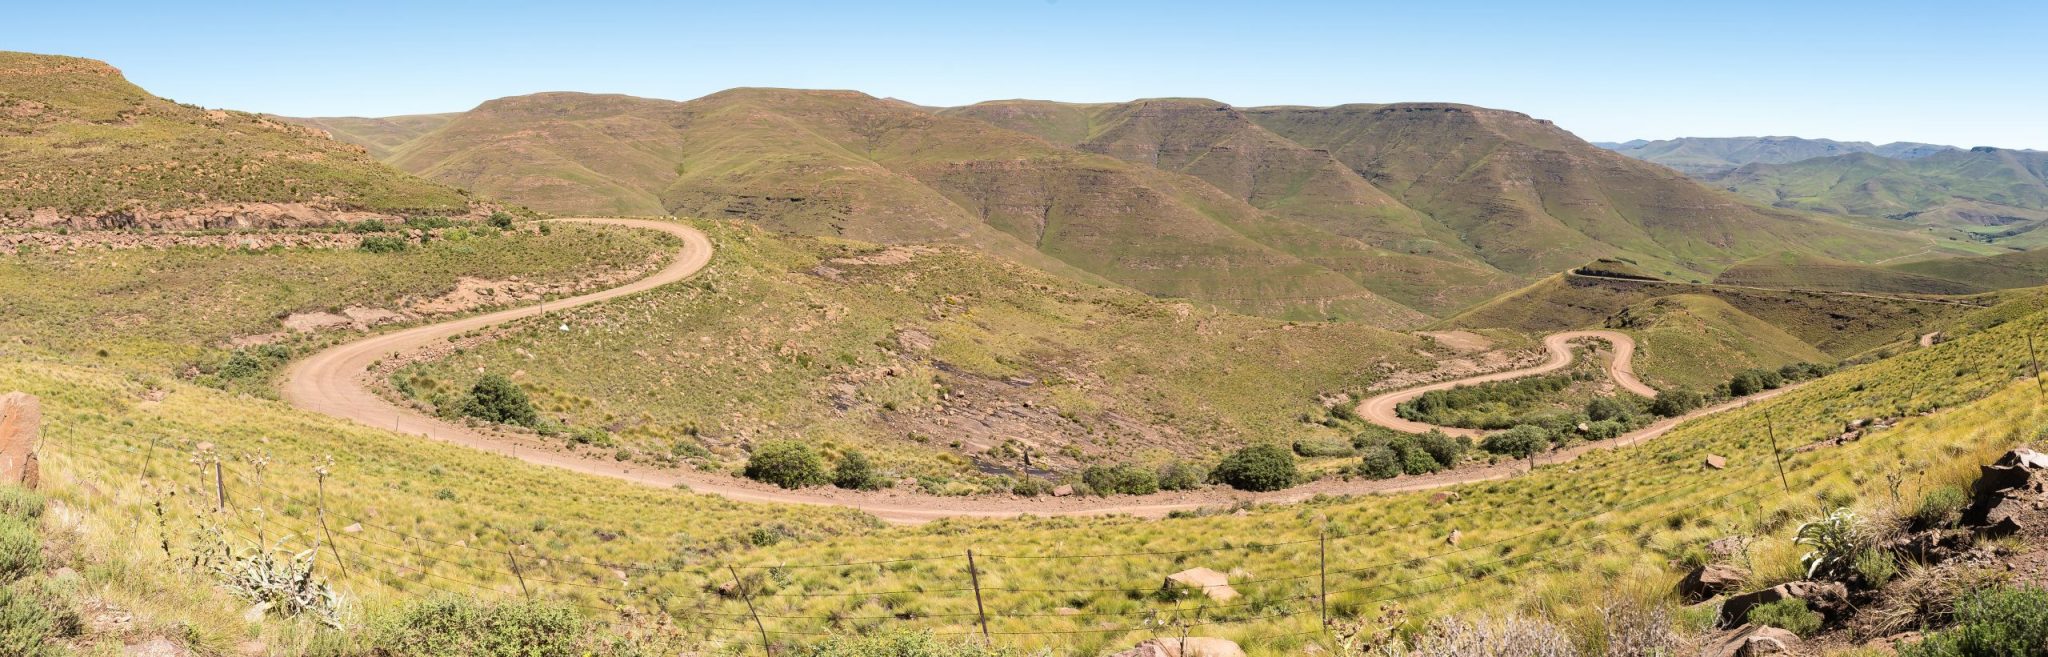 A view of the hairpin bends in the Naudes Nek Pass in the Eastern Cape Province of South Africa